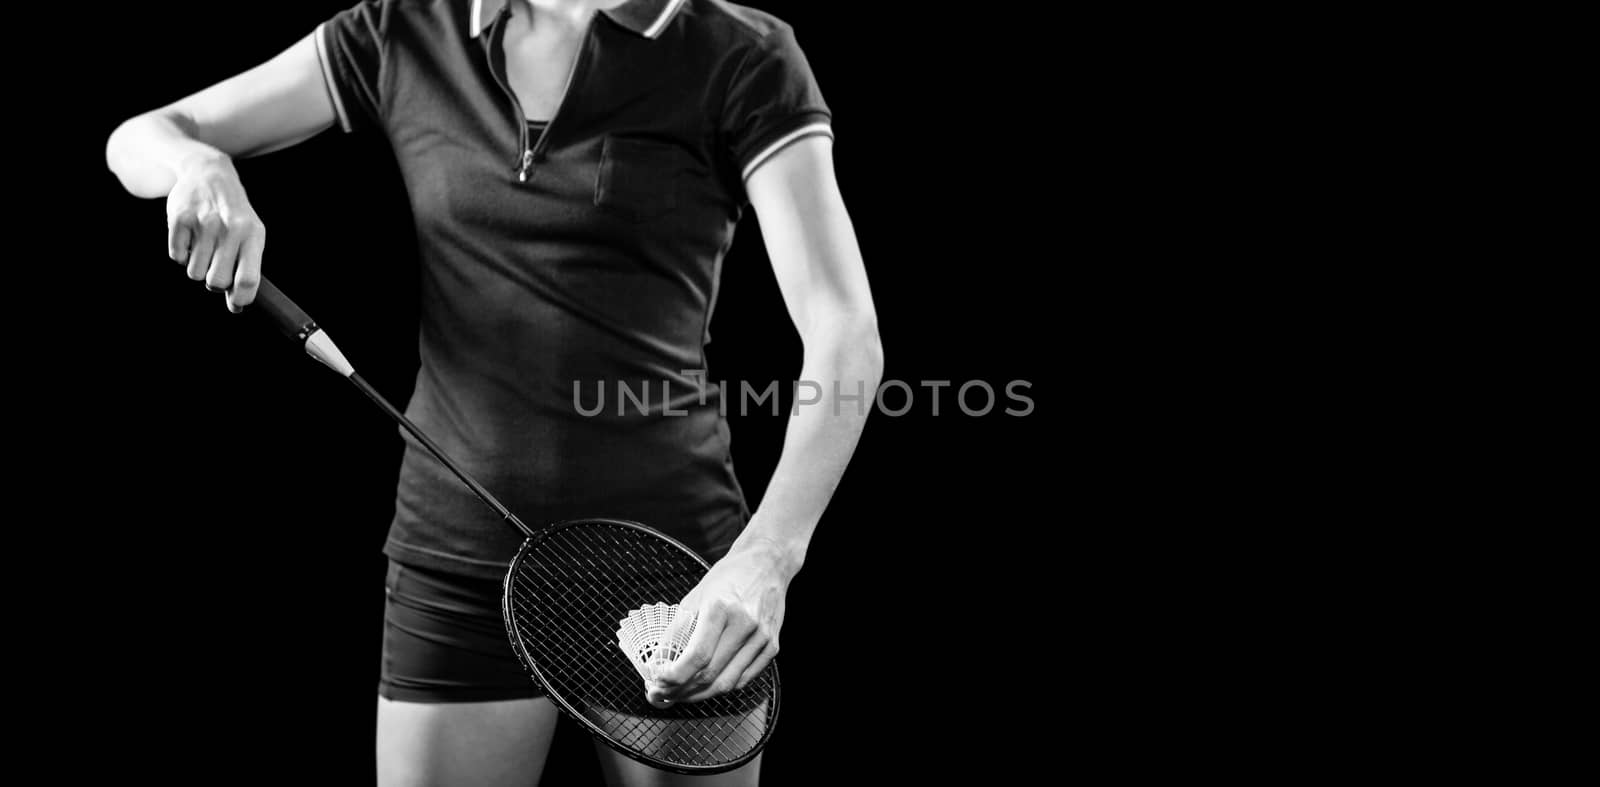 Badminton player holding a racquet ready to serve on black background